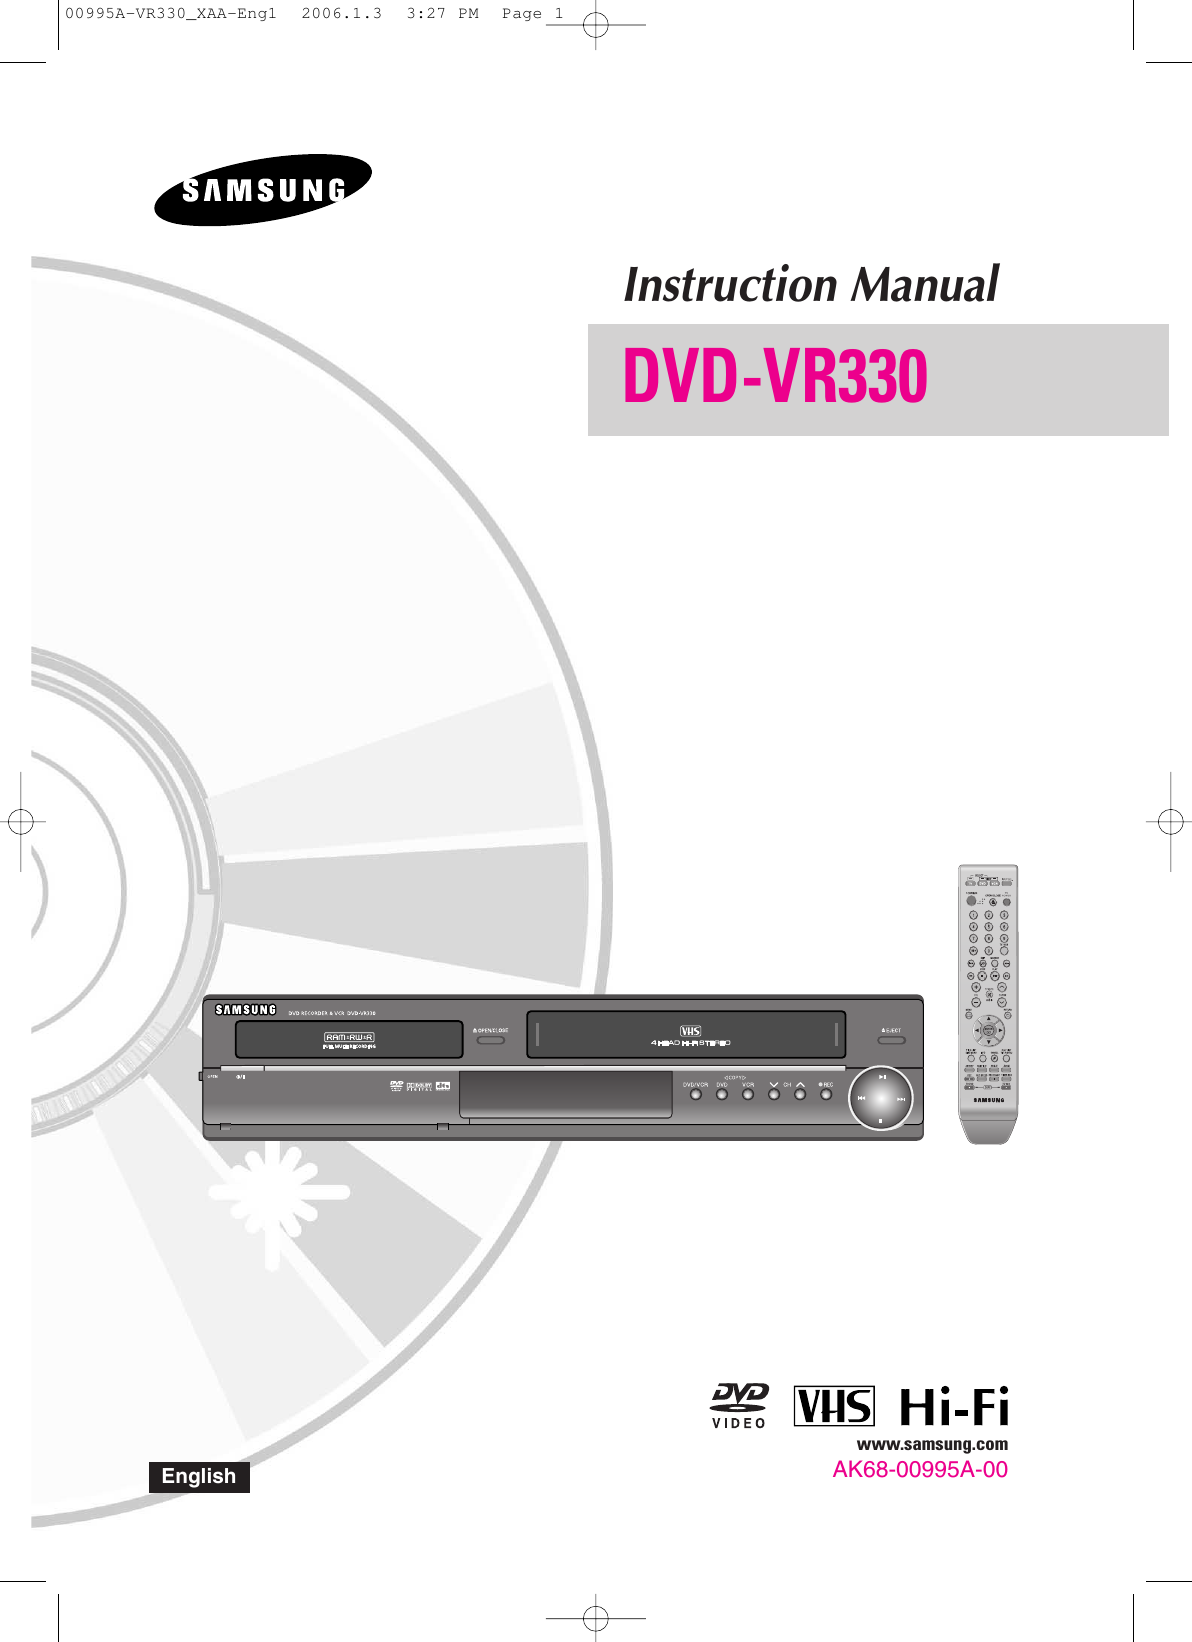 Instruction ManualDVD-VR330www.samsung.comAK68-00995A-00English00995A-VR330_XAA-Eng1  2006.1.3  3:27 PM  Page 1